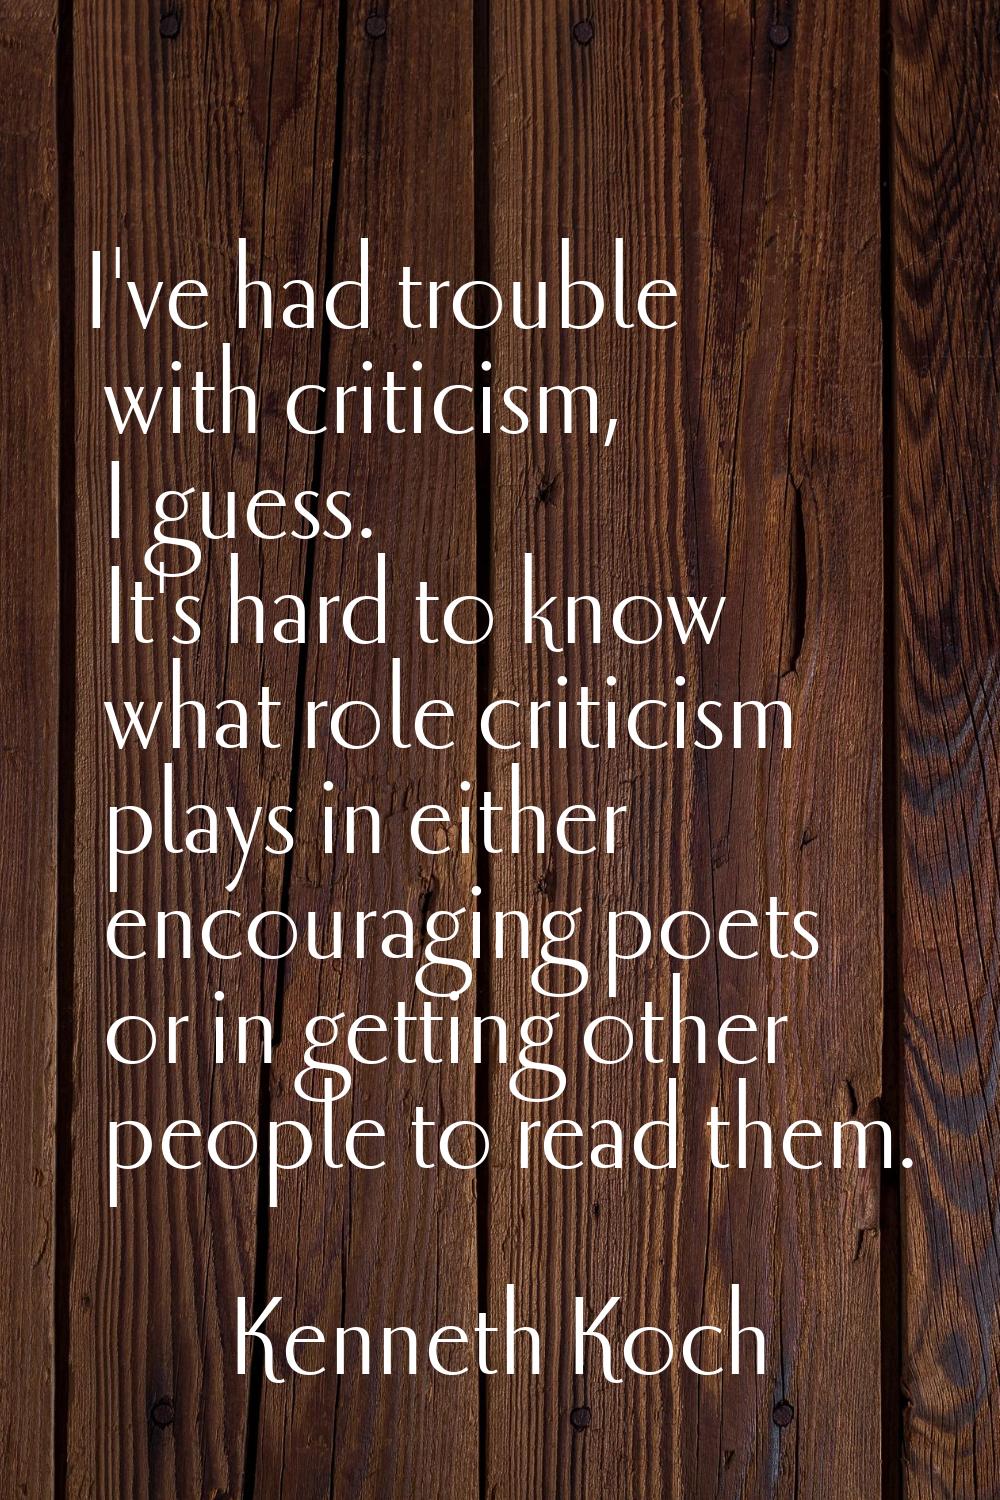 I've had trouble with criticism, I guess. It's hard to know what role criticism plays in either enc